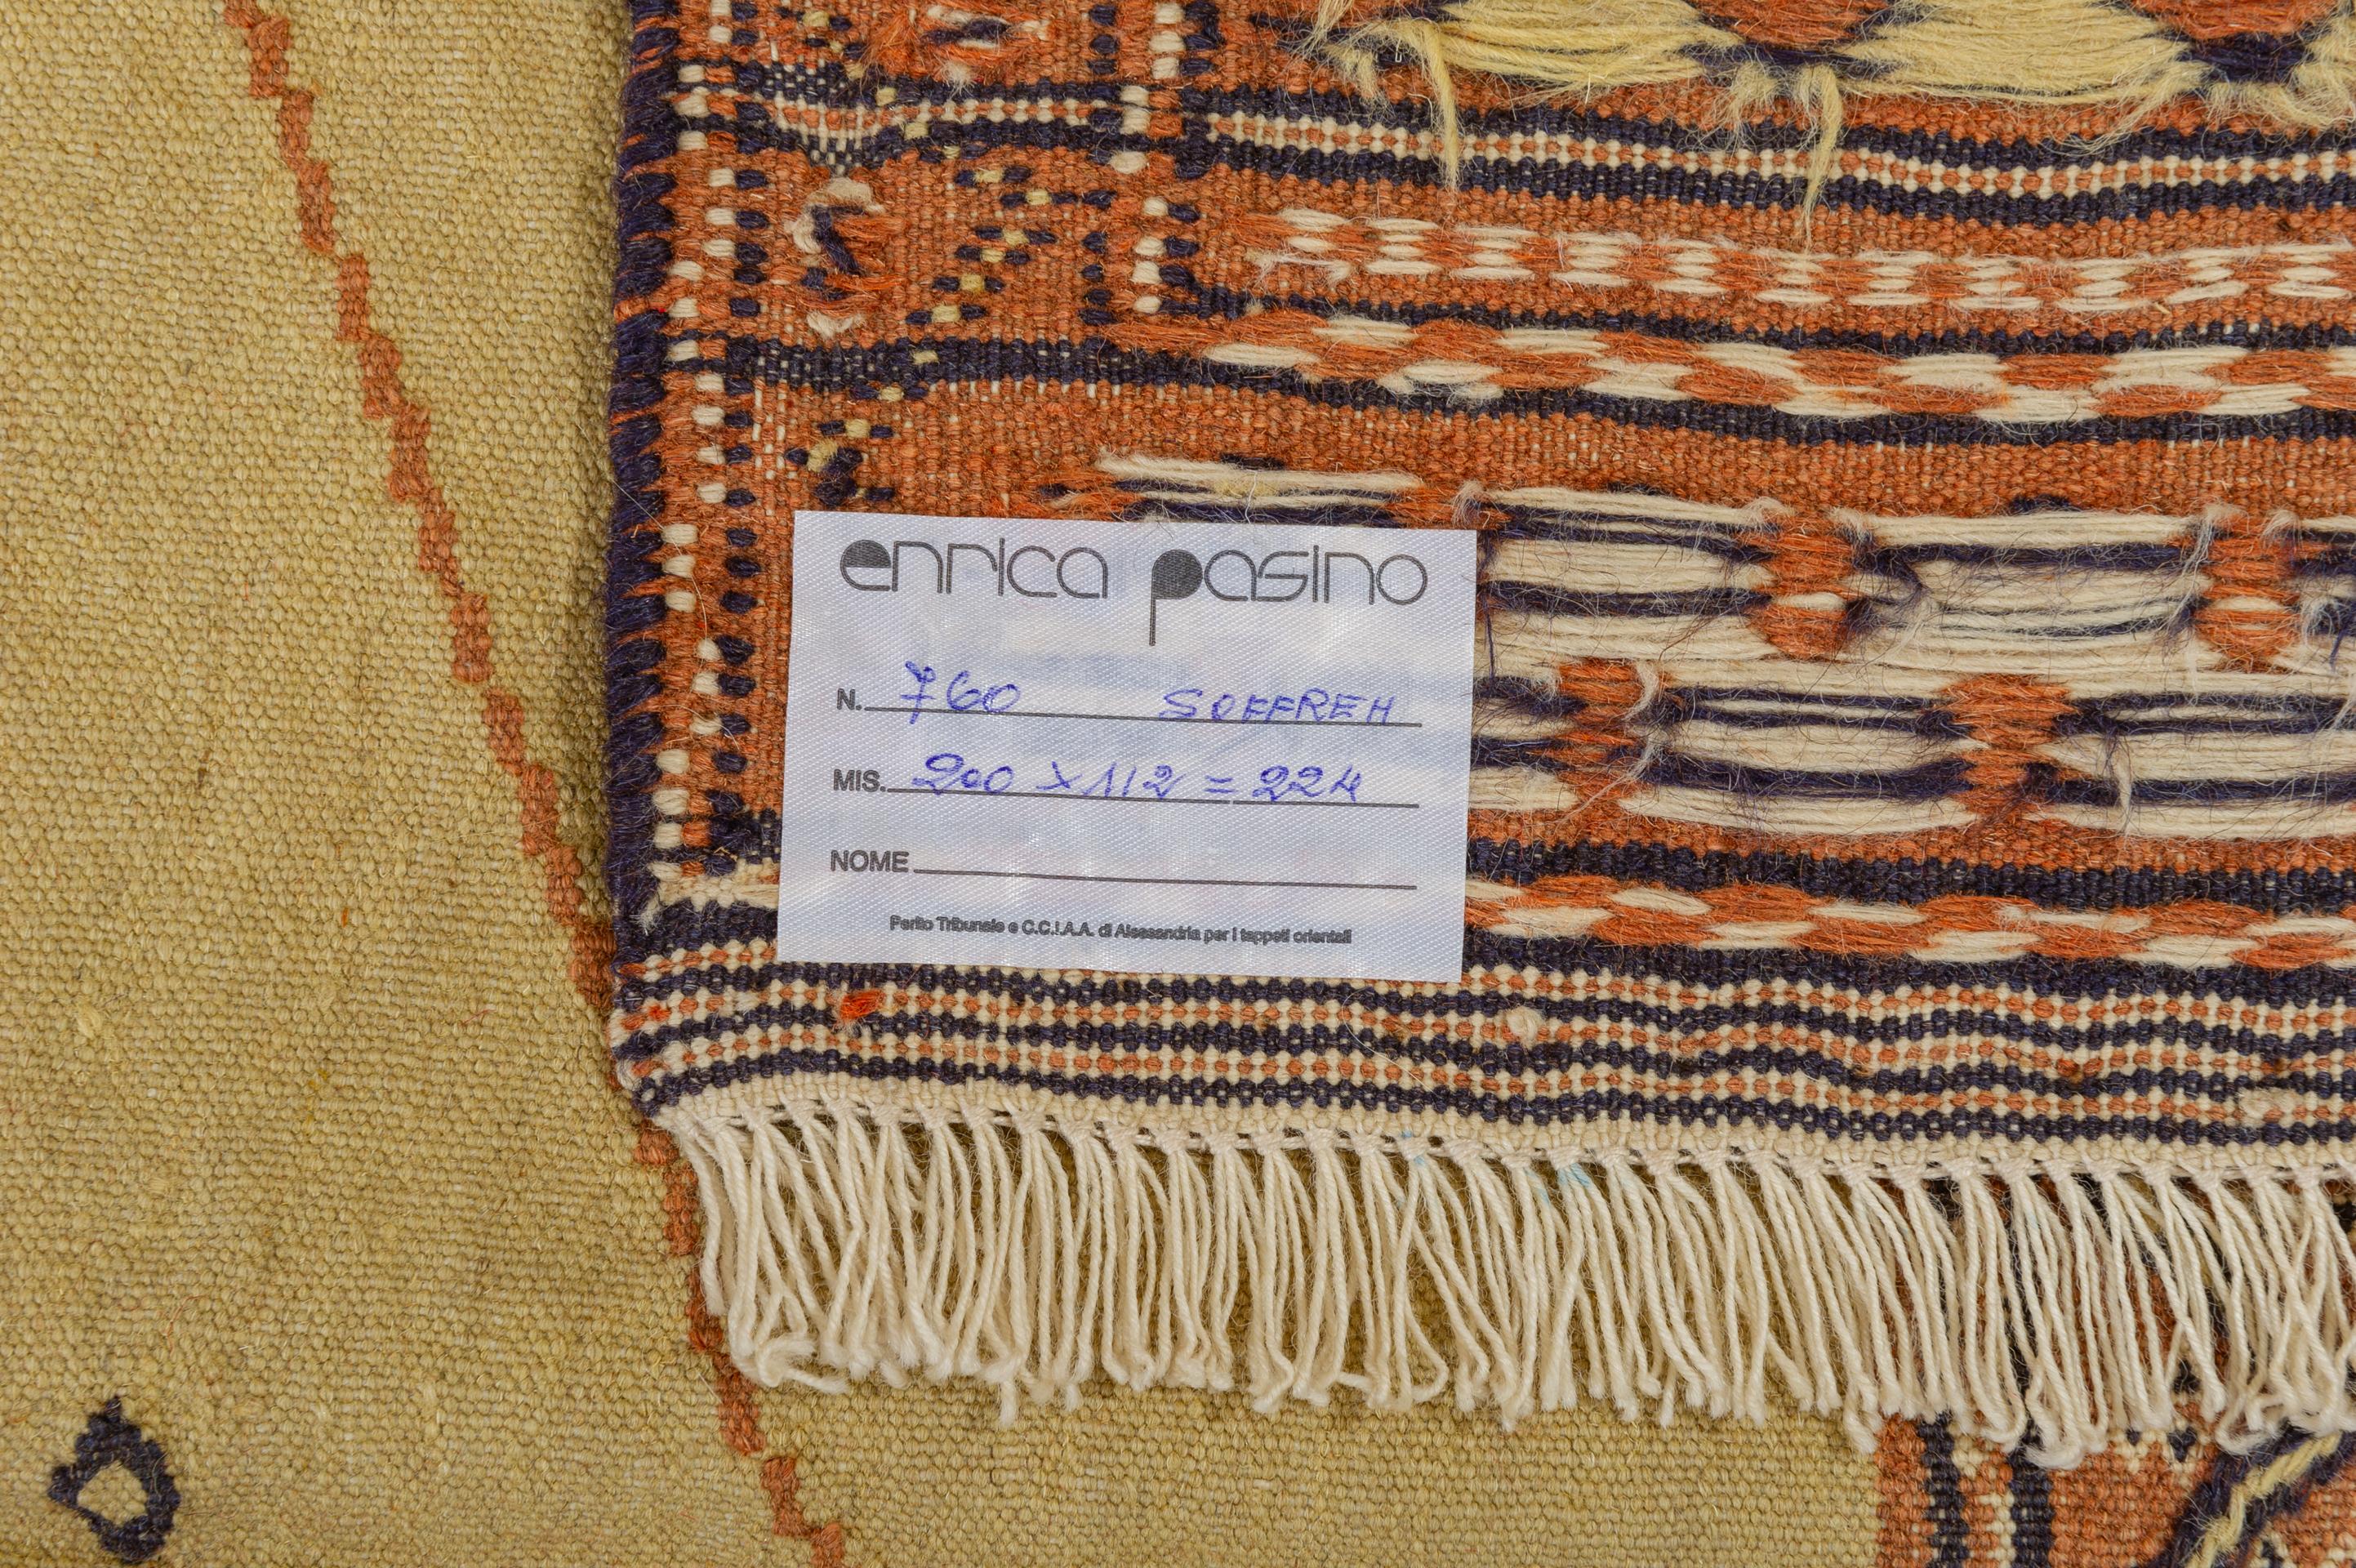 nr. 760 - This type of kilim is used as tablecloths on the ground: its name is 